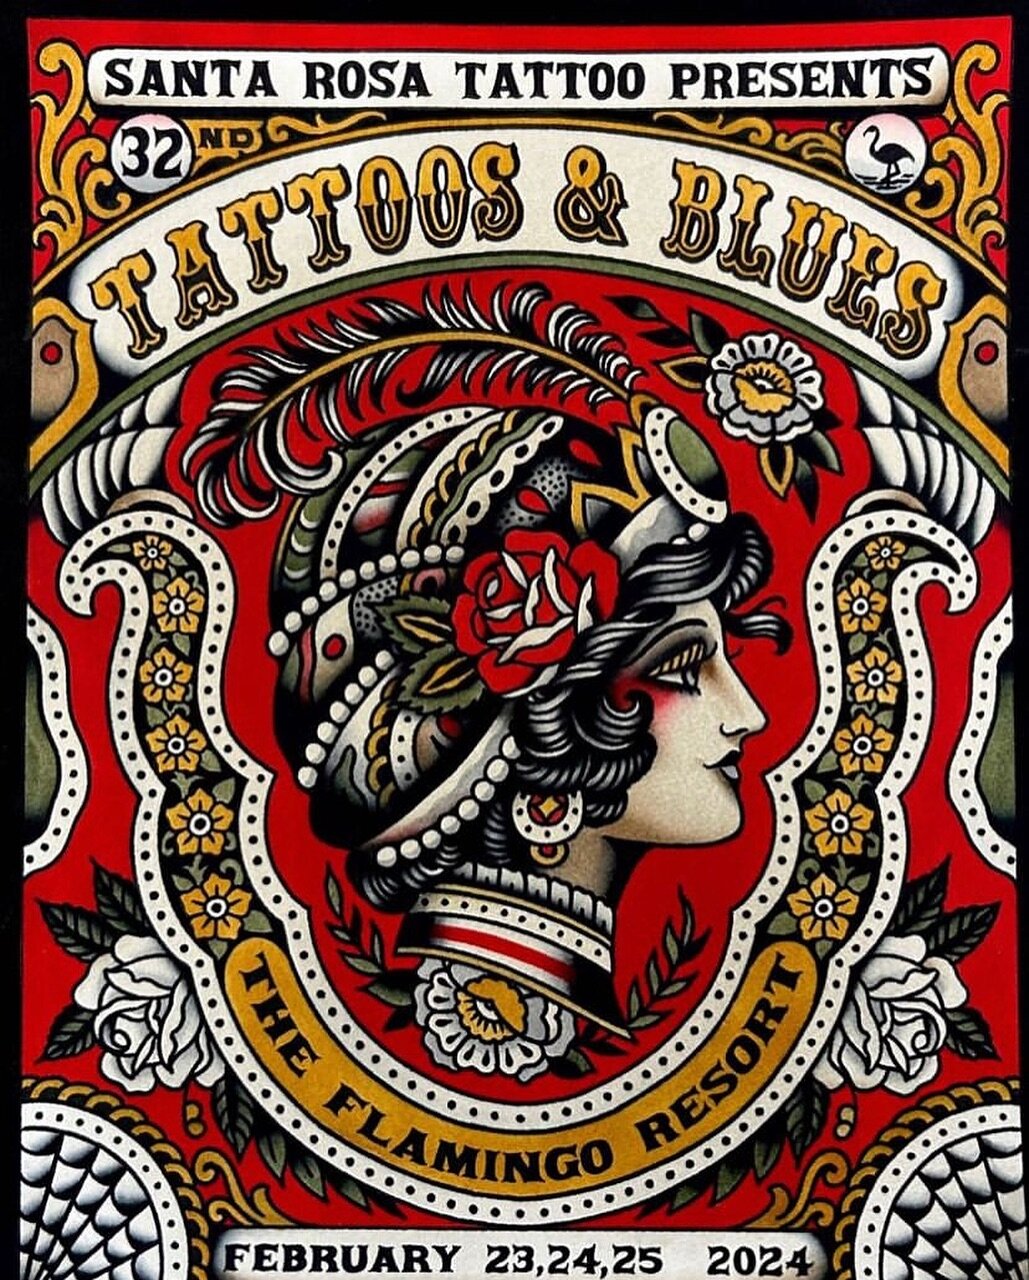 Can&rsquo;t believe this is already next week! Find @l.myt and @dresdenmade at the @twotentattoo booth for tattoos, and fresh merch 👍🏽 Thank you @daat_kraus @santarosatattoo for having us once again!! #santarosa #tattoosandblues